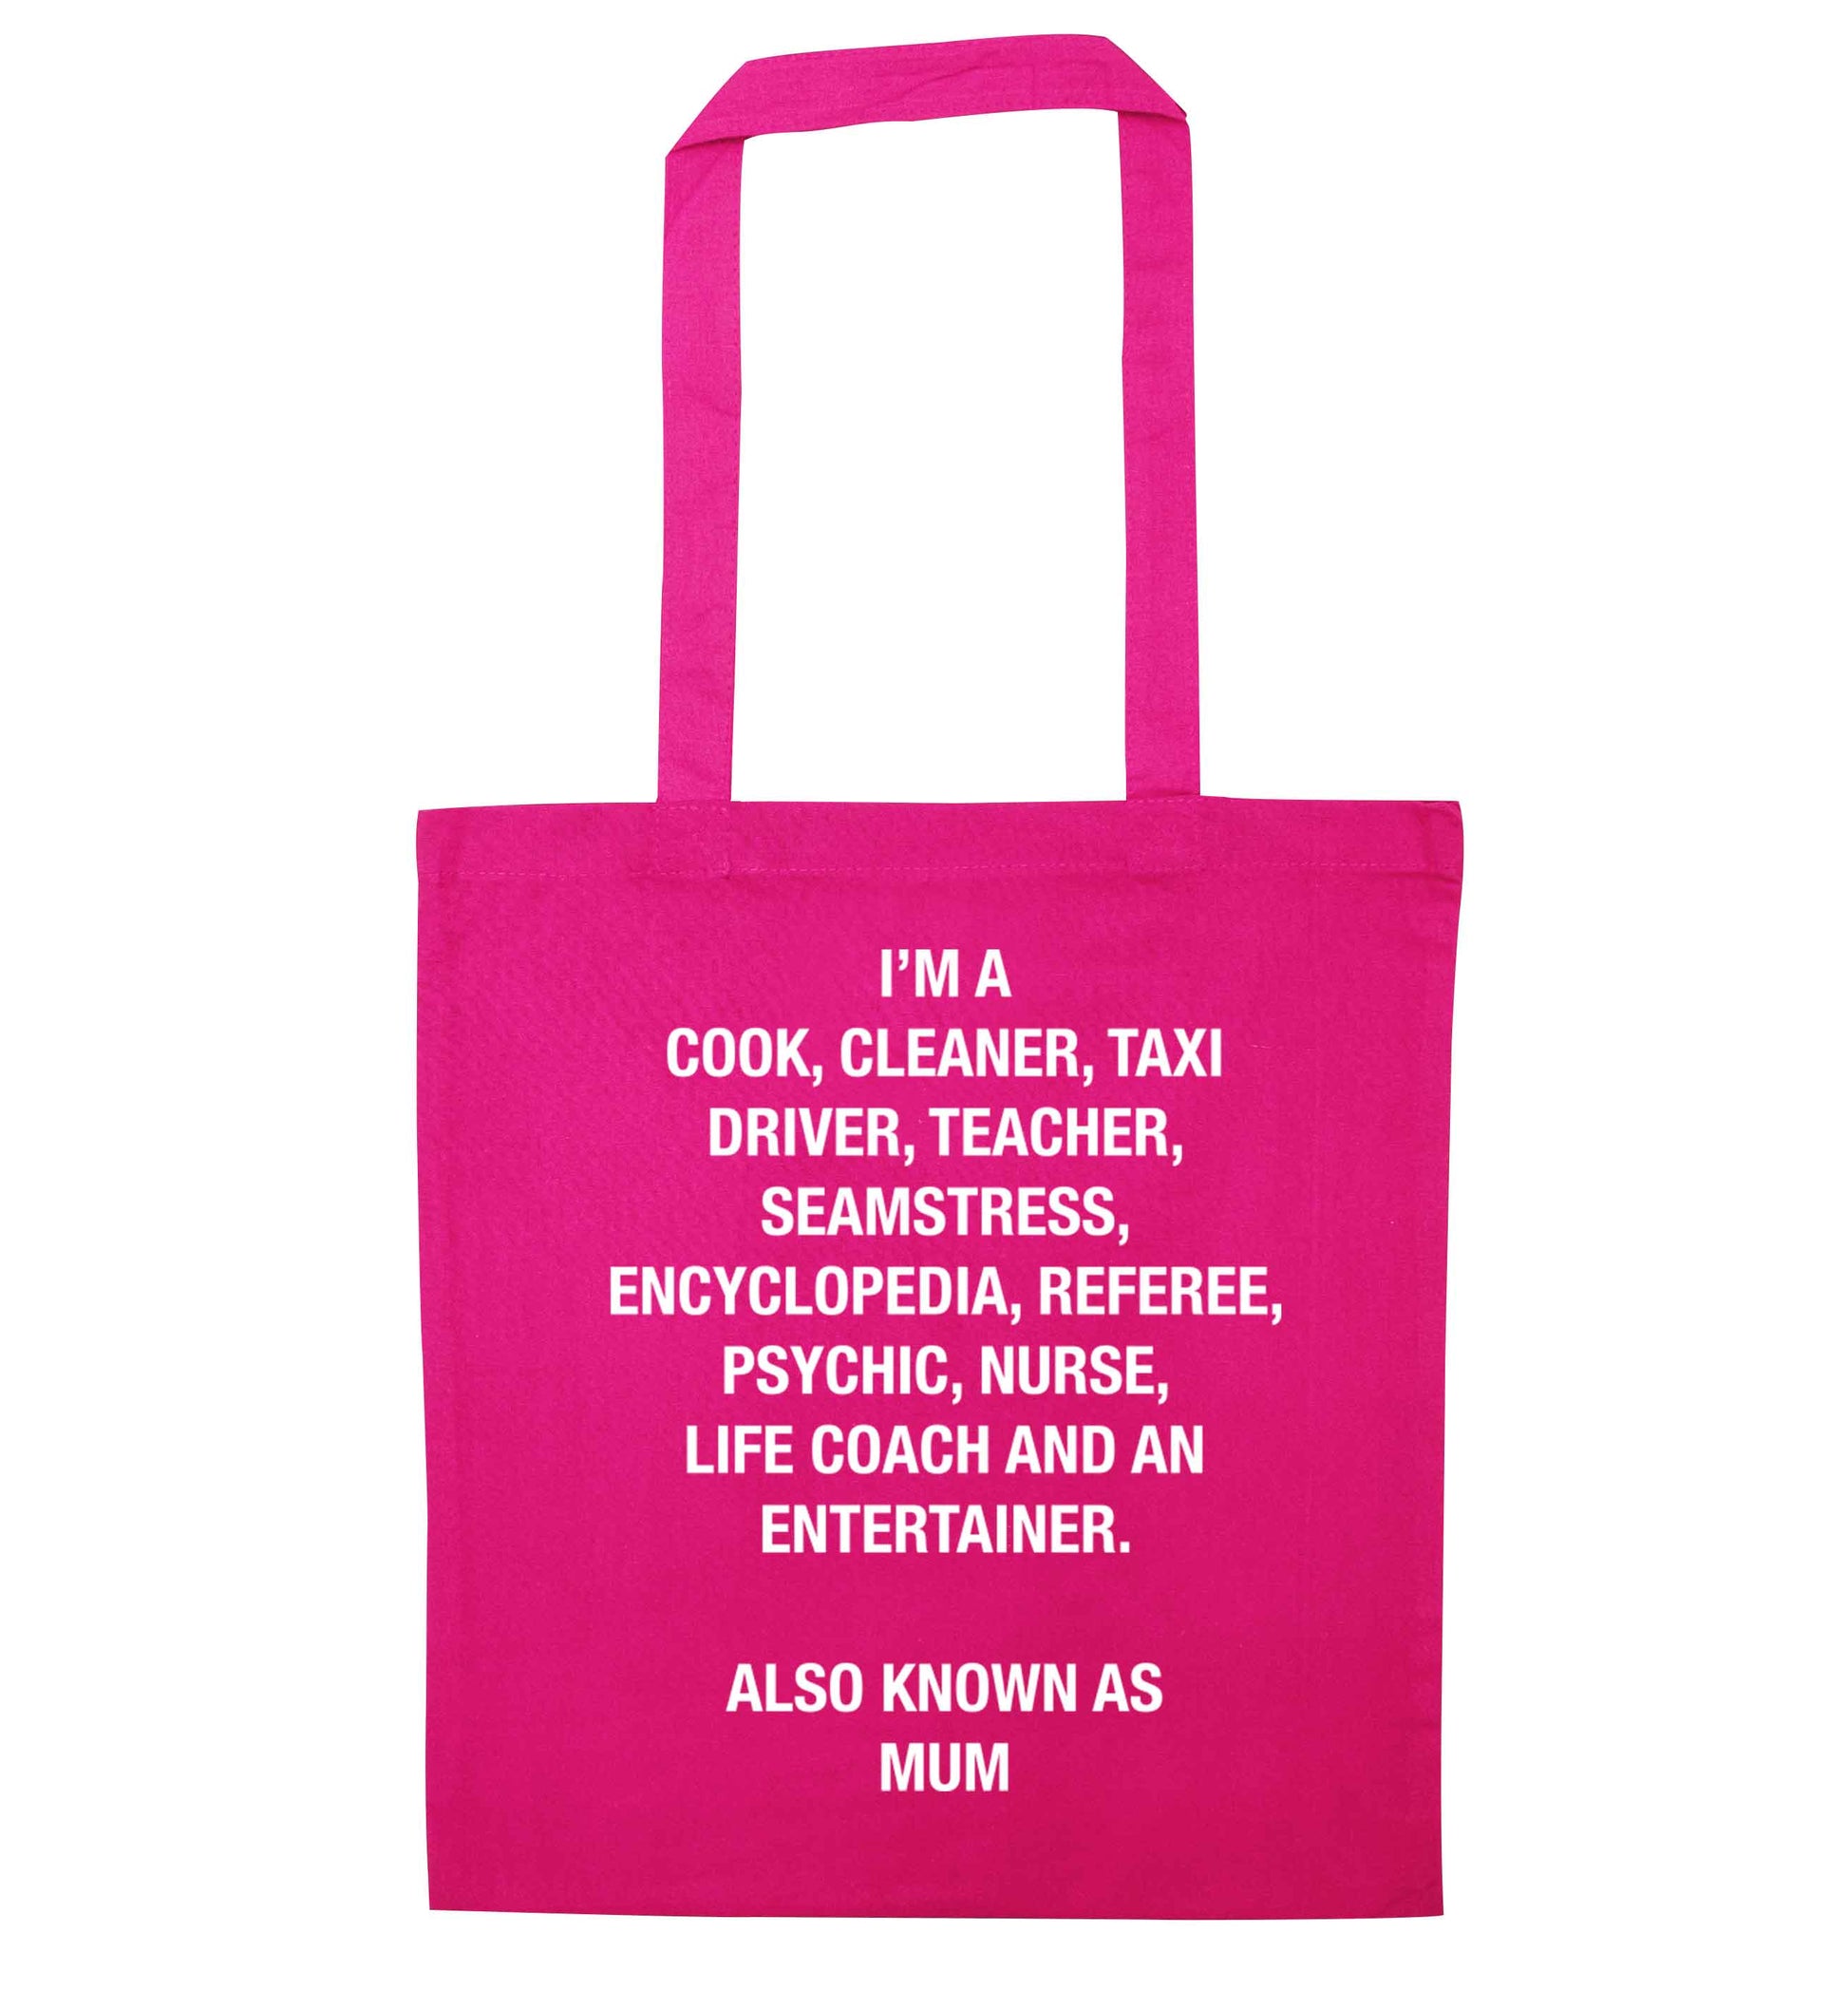 Funny gifts for your mum on mother's dayor her birthday! Mum, cook, cleaner, taxi driver, teacher, seamstress, encyclopedia, referee, psychic, nurse, life coach and entertainer pink tote bag